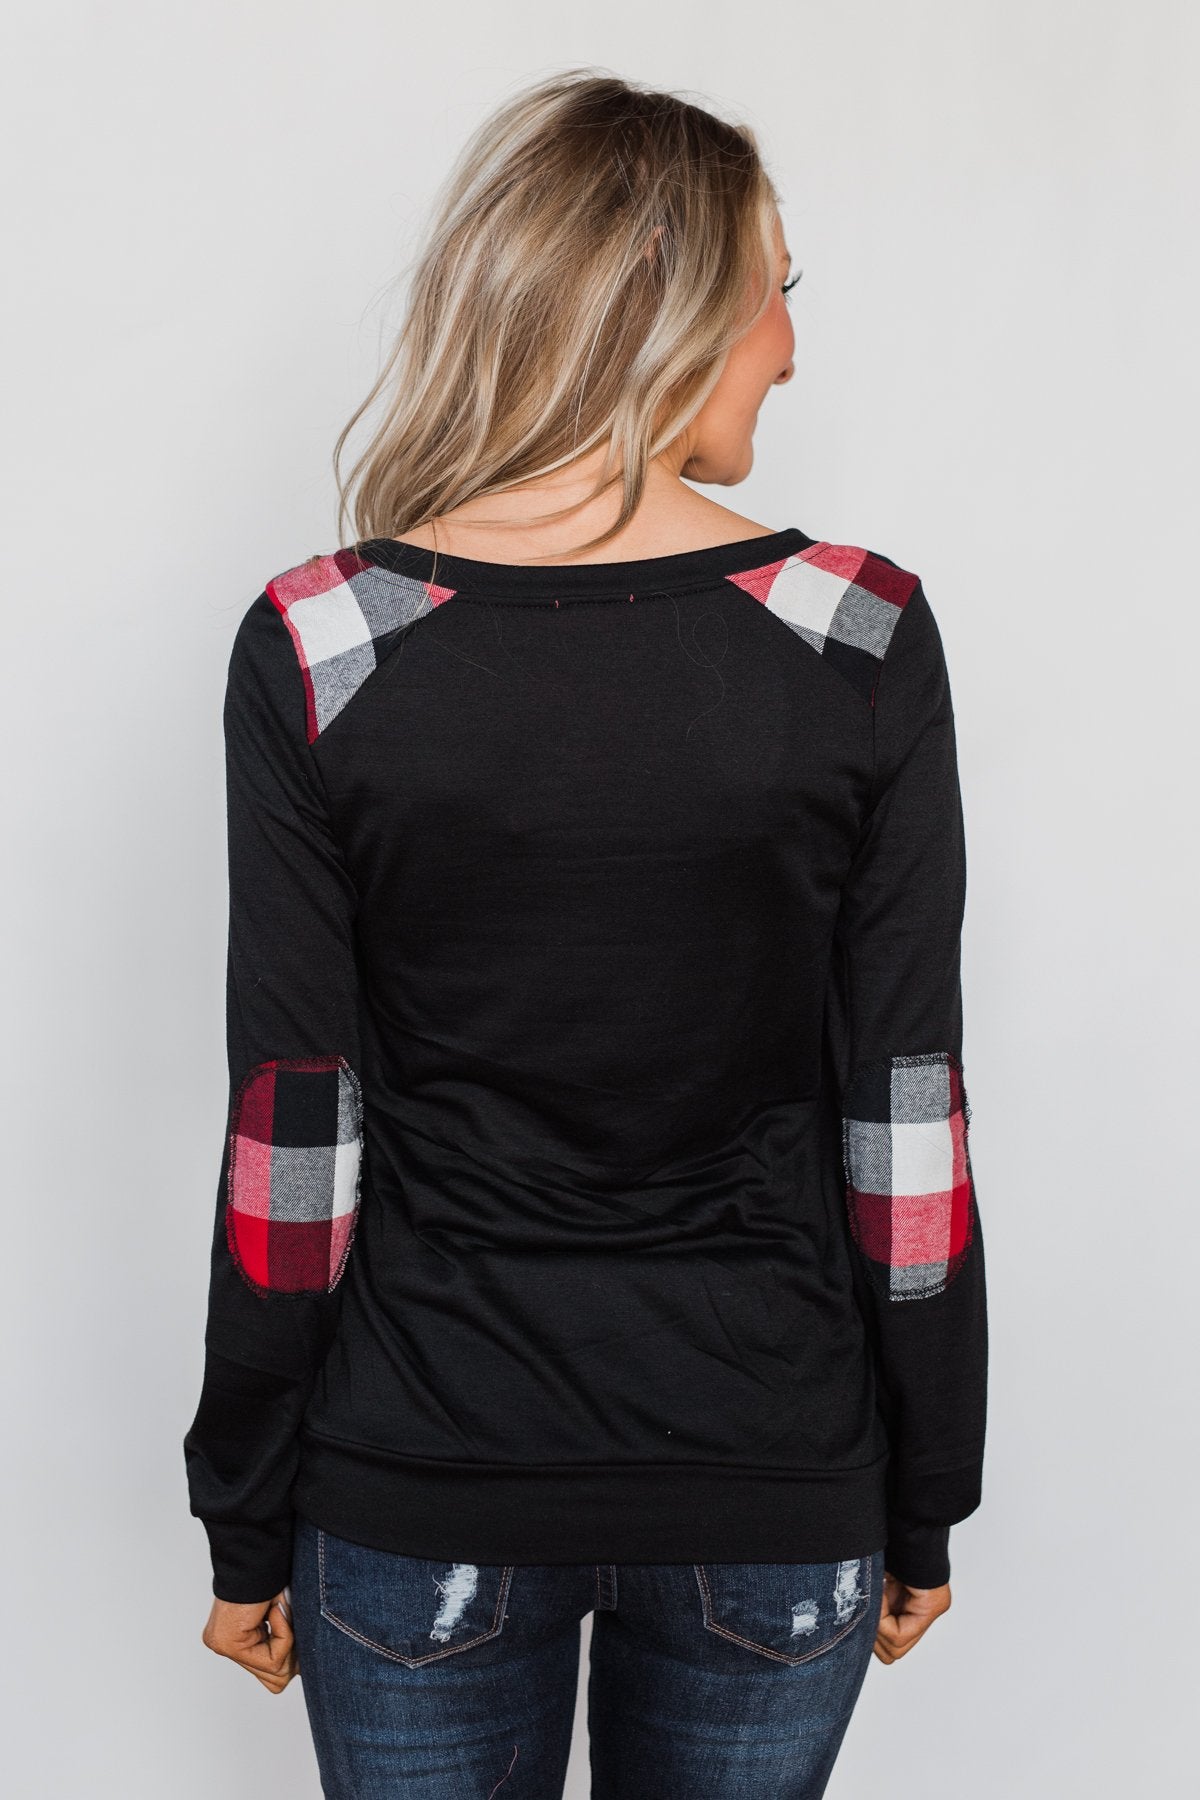 Tangled Up in Plaid Top- Black